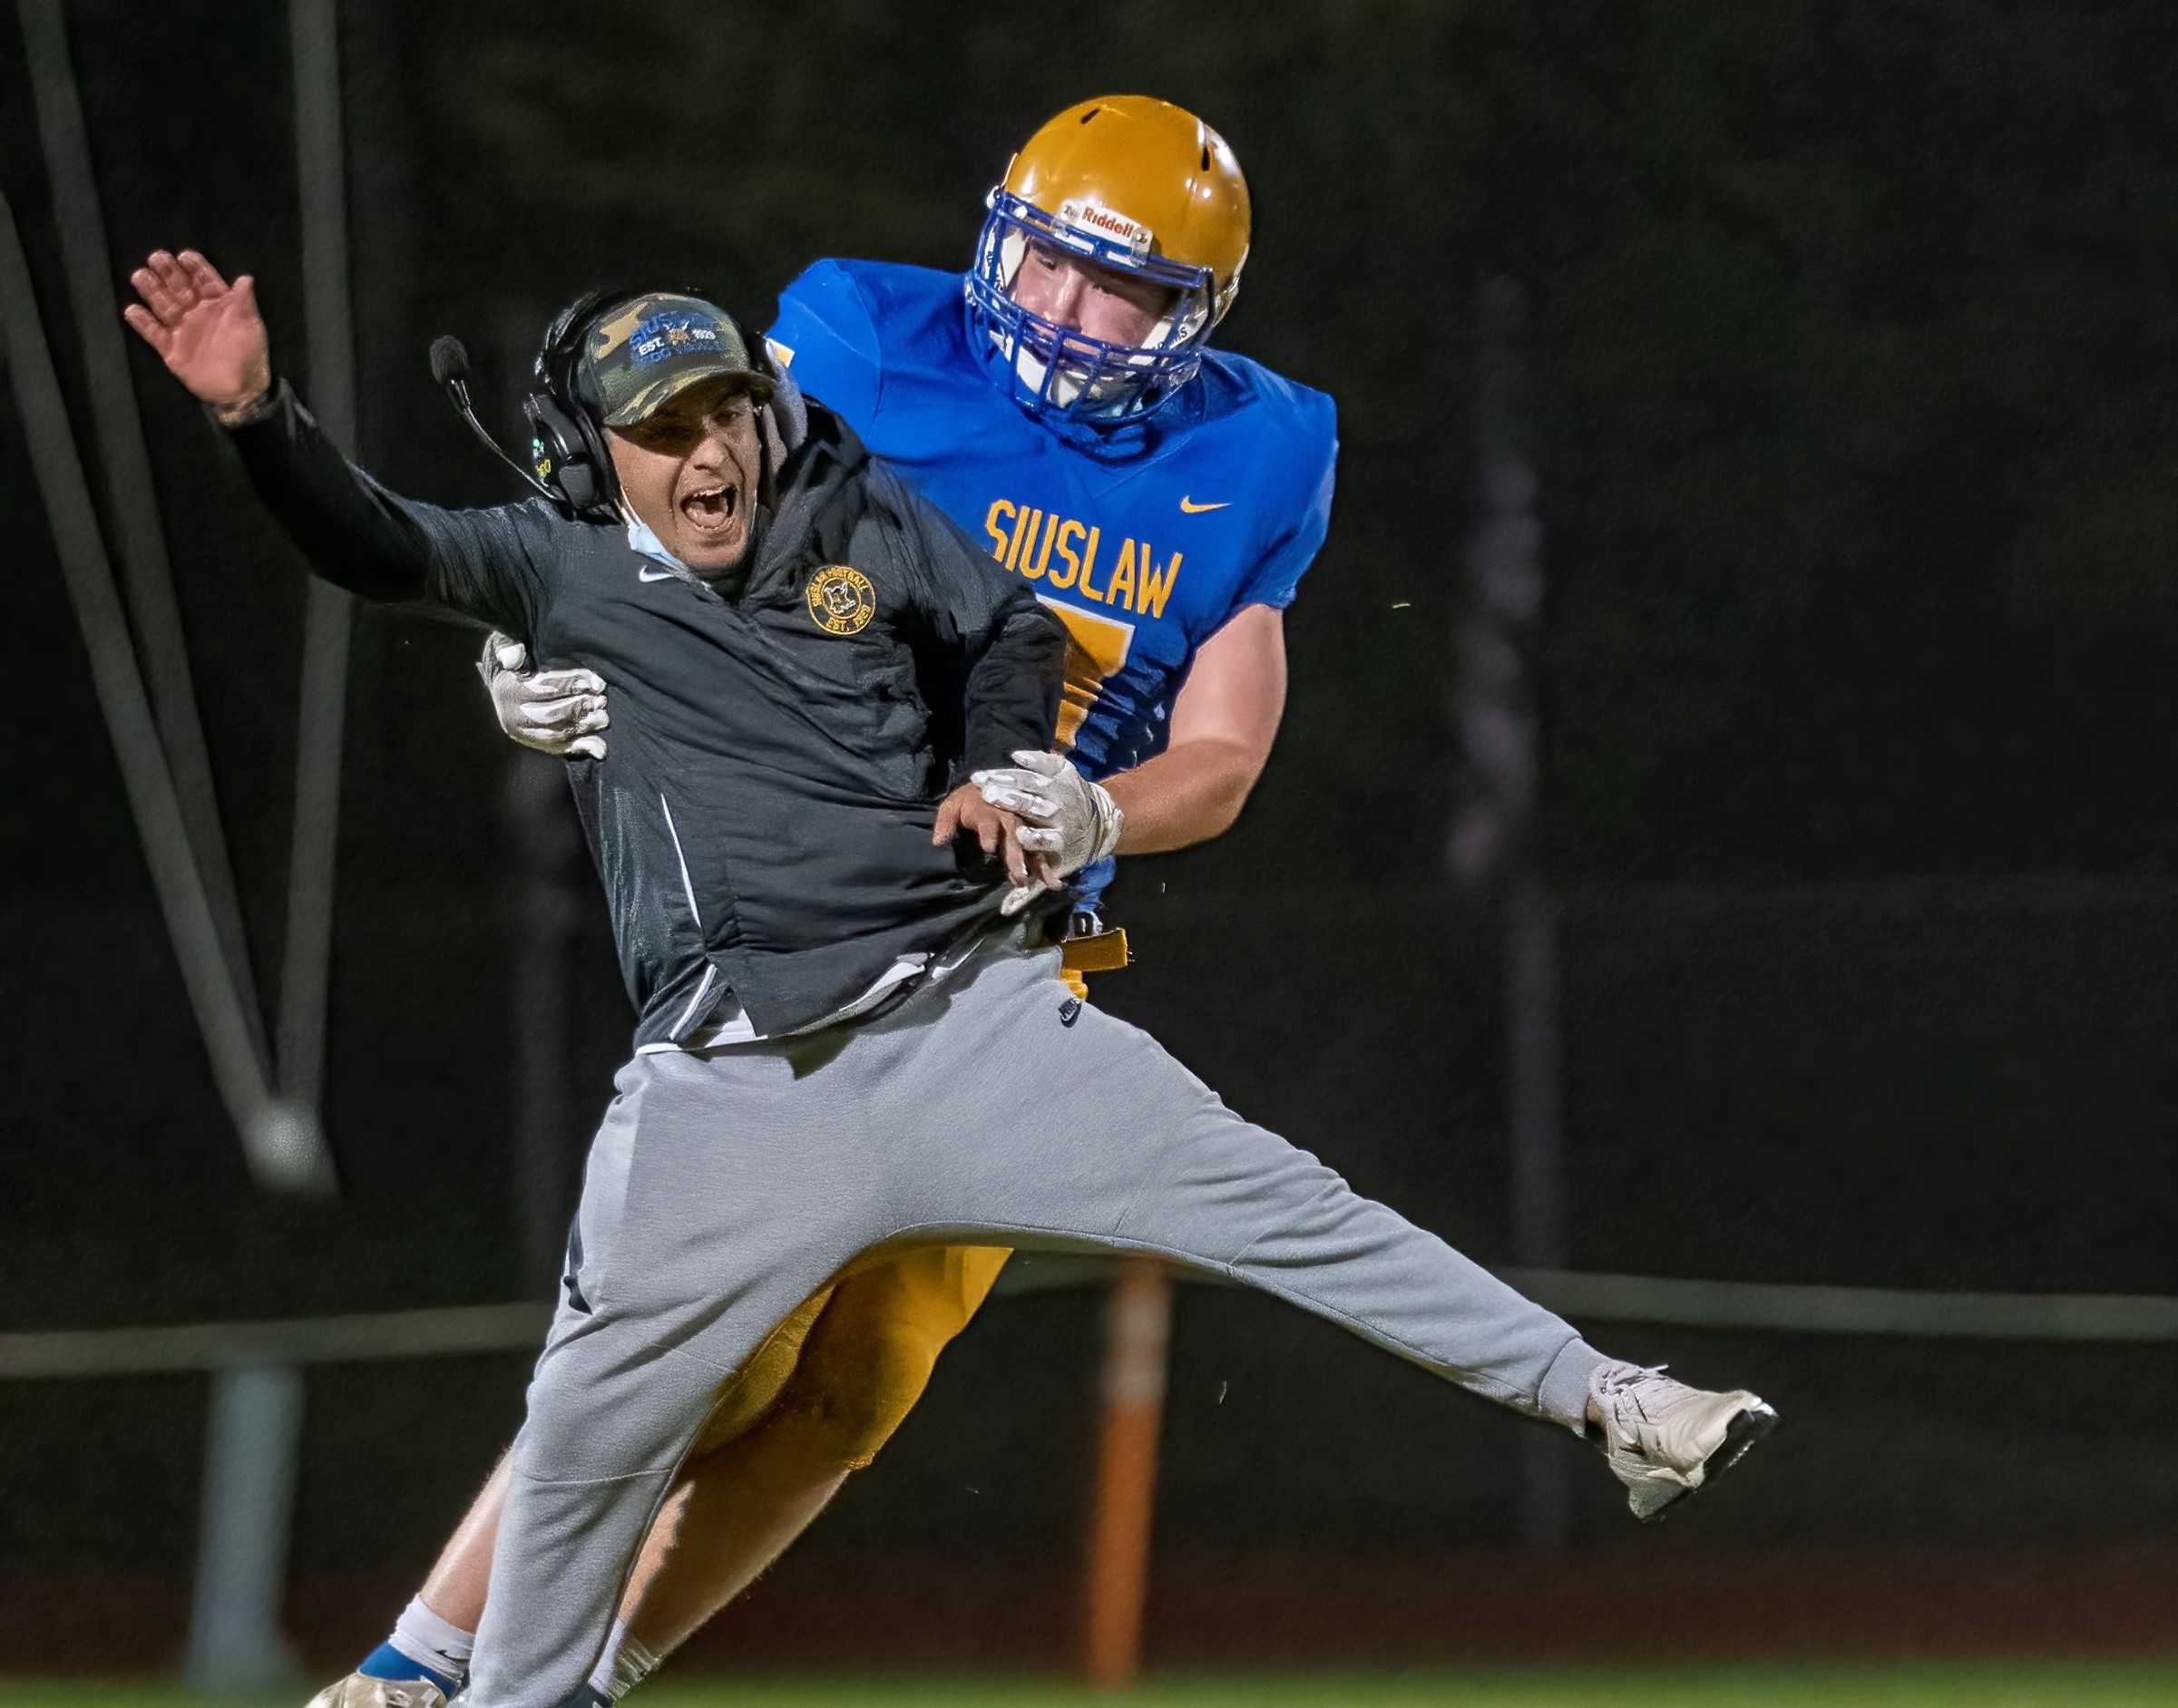 Siuslaw coach Sam Johnson, with junior Ian Sissel, led the team to a 3A title in his third season. (Photo by Cameron Jagoe)